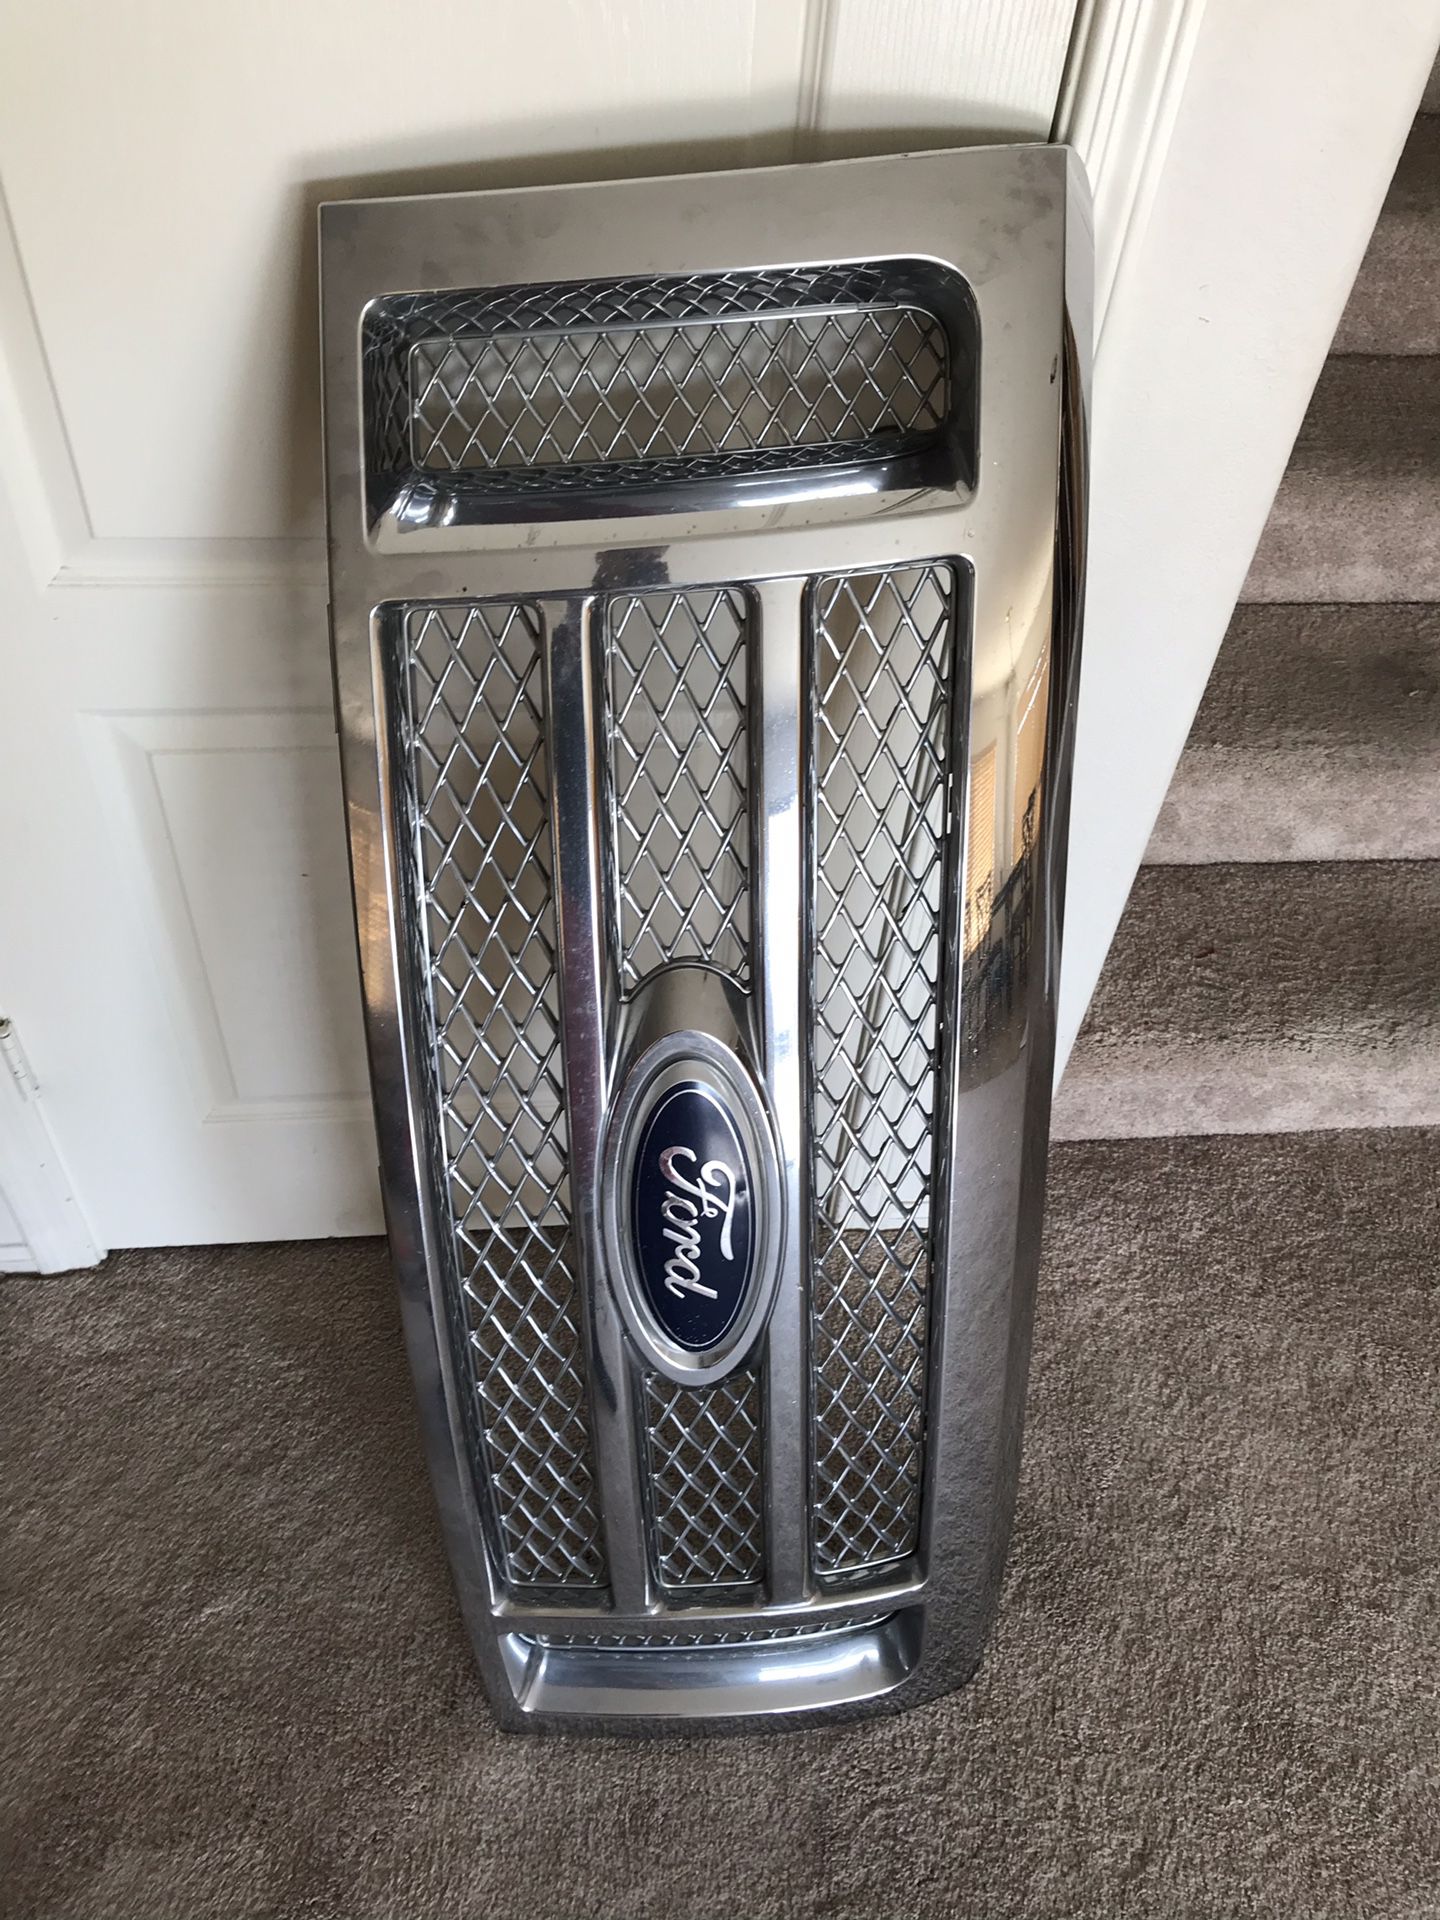 2009 - 2014 Ford F-150 grille